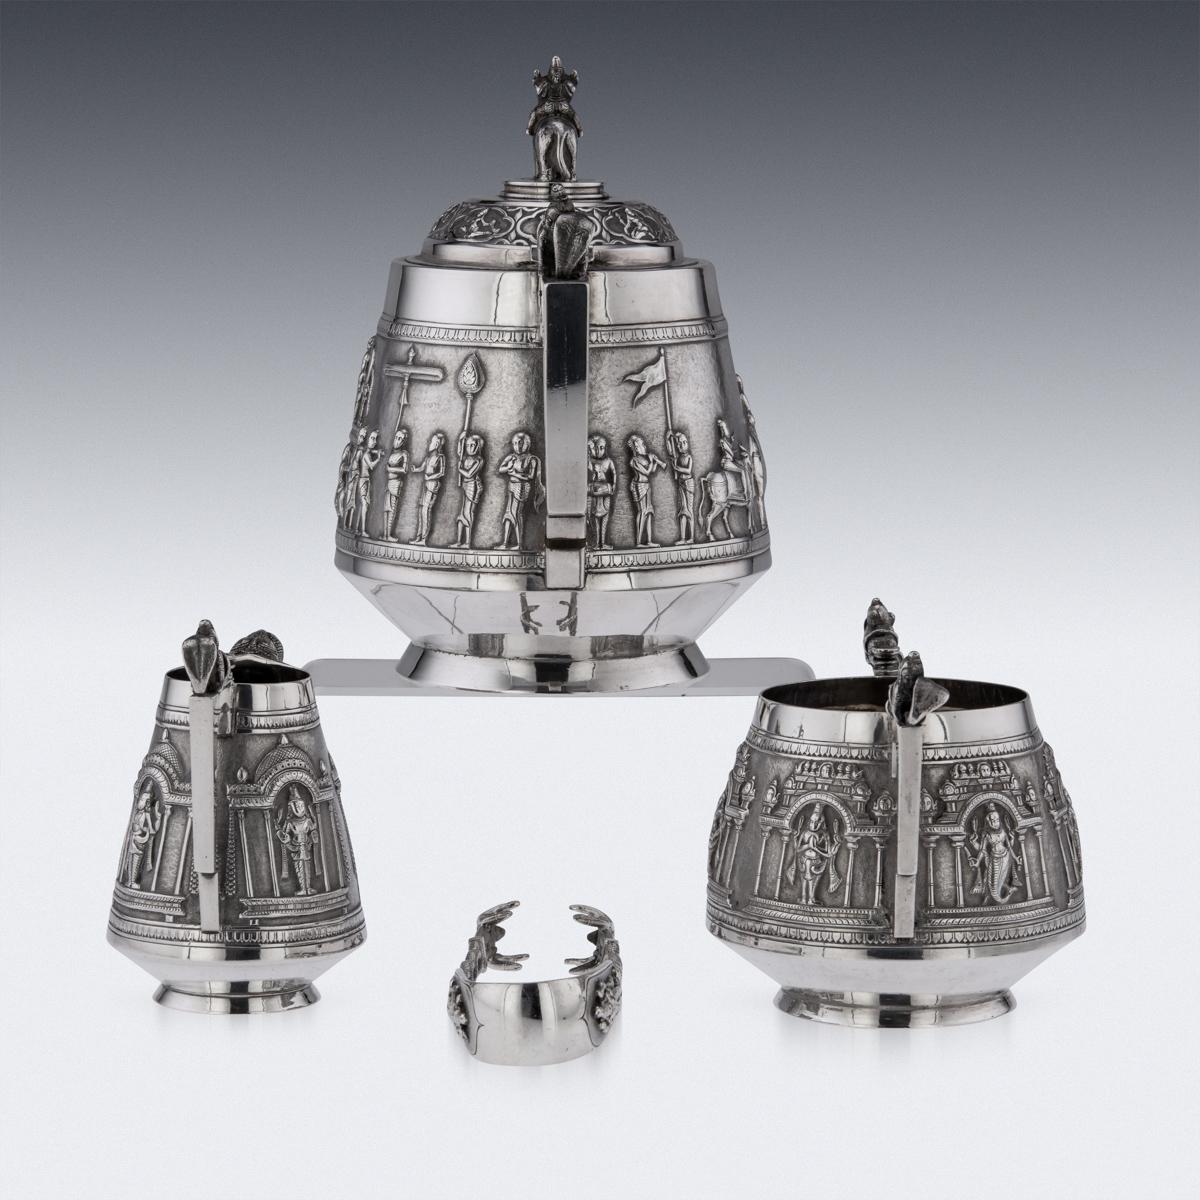 Antique 19th Century Indian Colonial solid silver four-piece tea set, comprising of teapot, sugar bowl, cream jug and tongs, each straight tapered body is profusely and beautifully repousse' decorated with a religious processions with men carrying